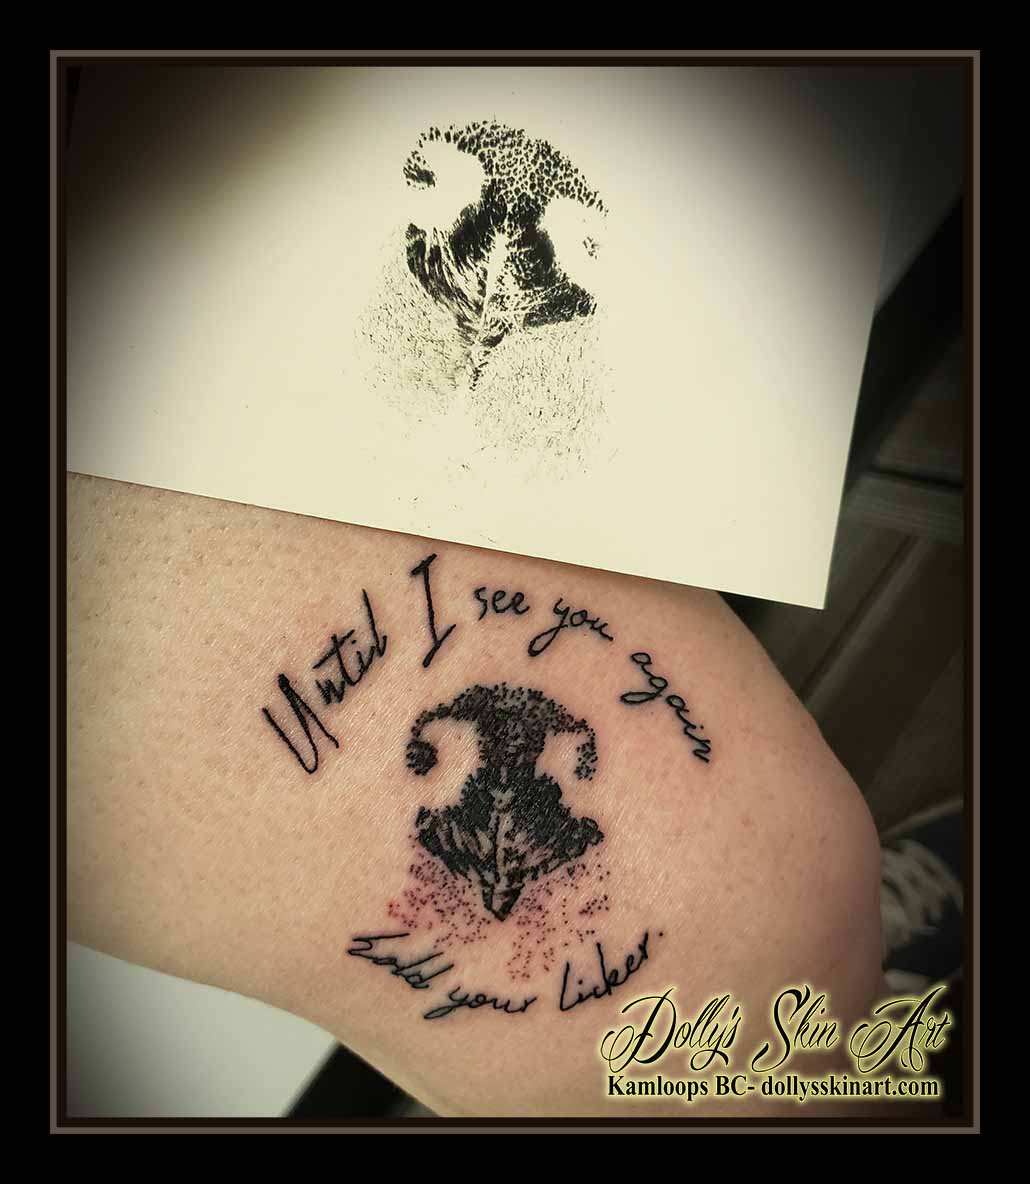 An incredibly special one for Tracy - Dolly's Skin Art Tattoo Kamloops BC